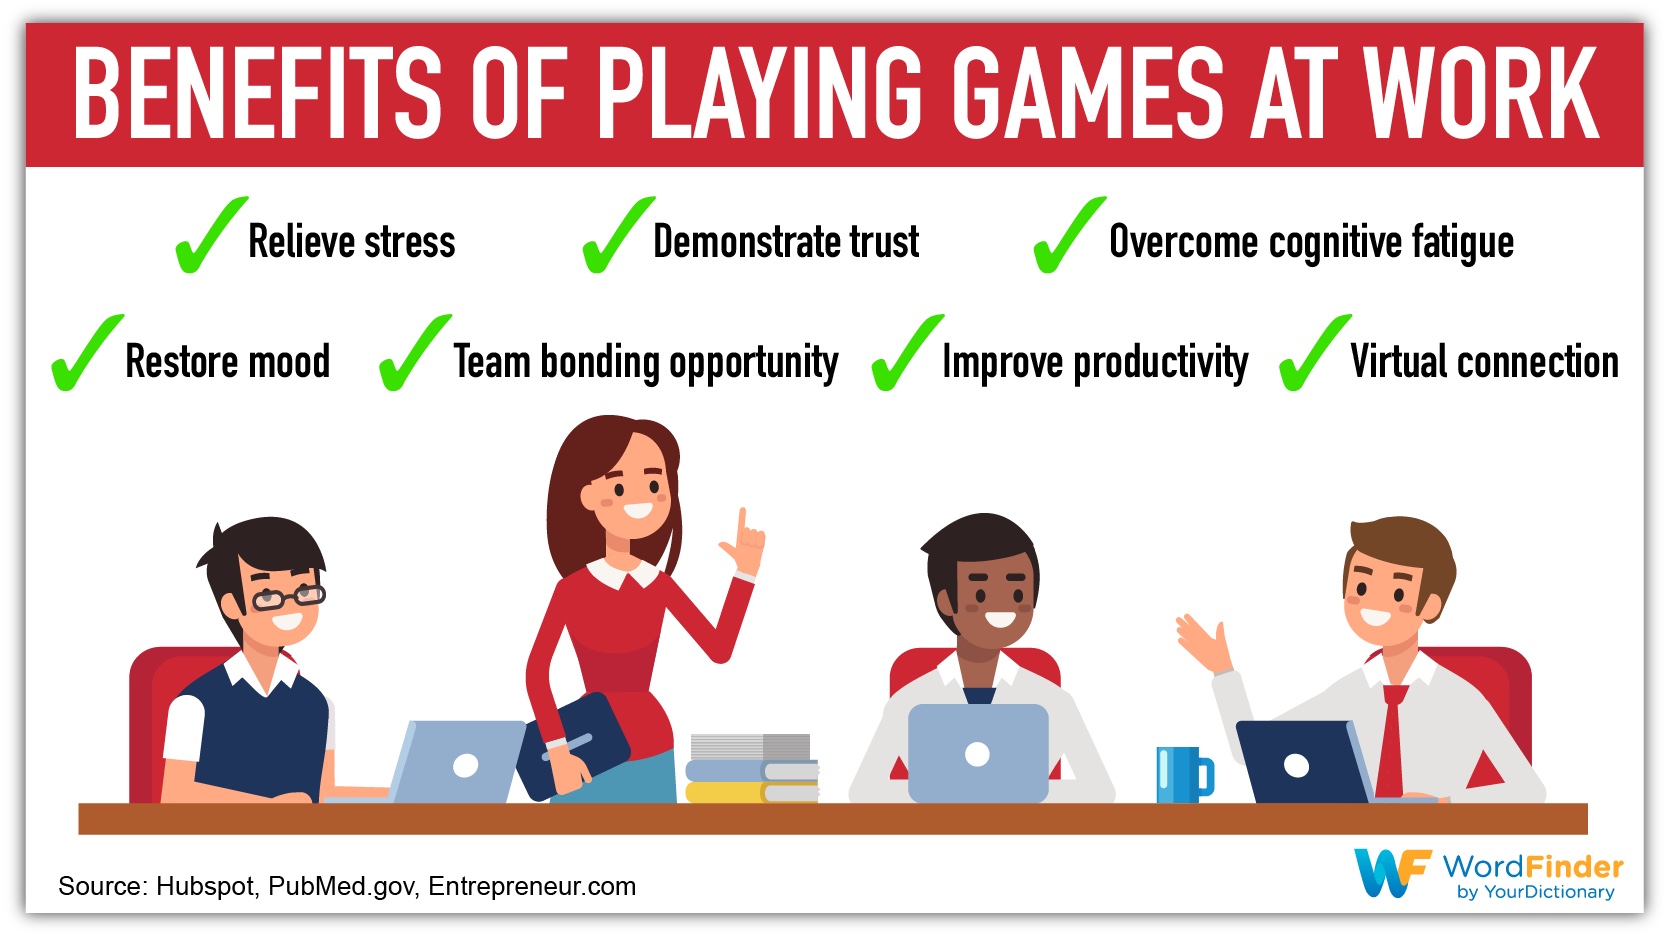 HELP EMPLOYEES GAME YOUR SYSTEM